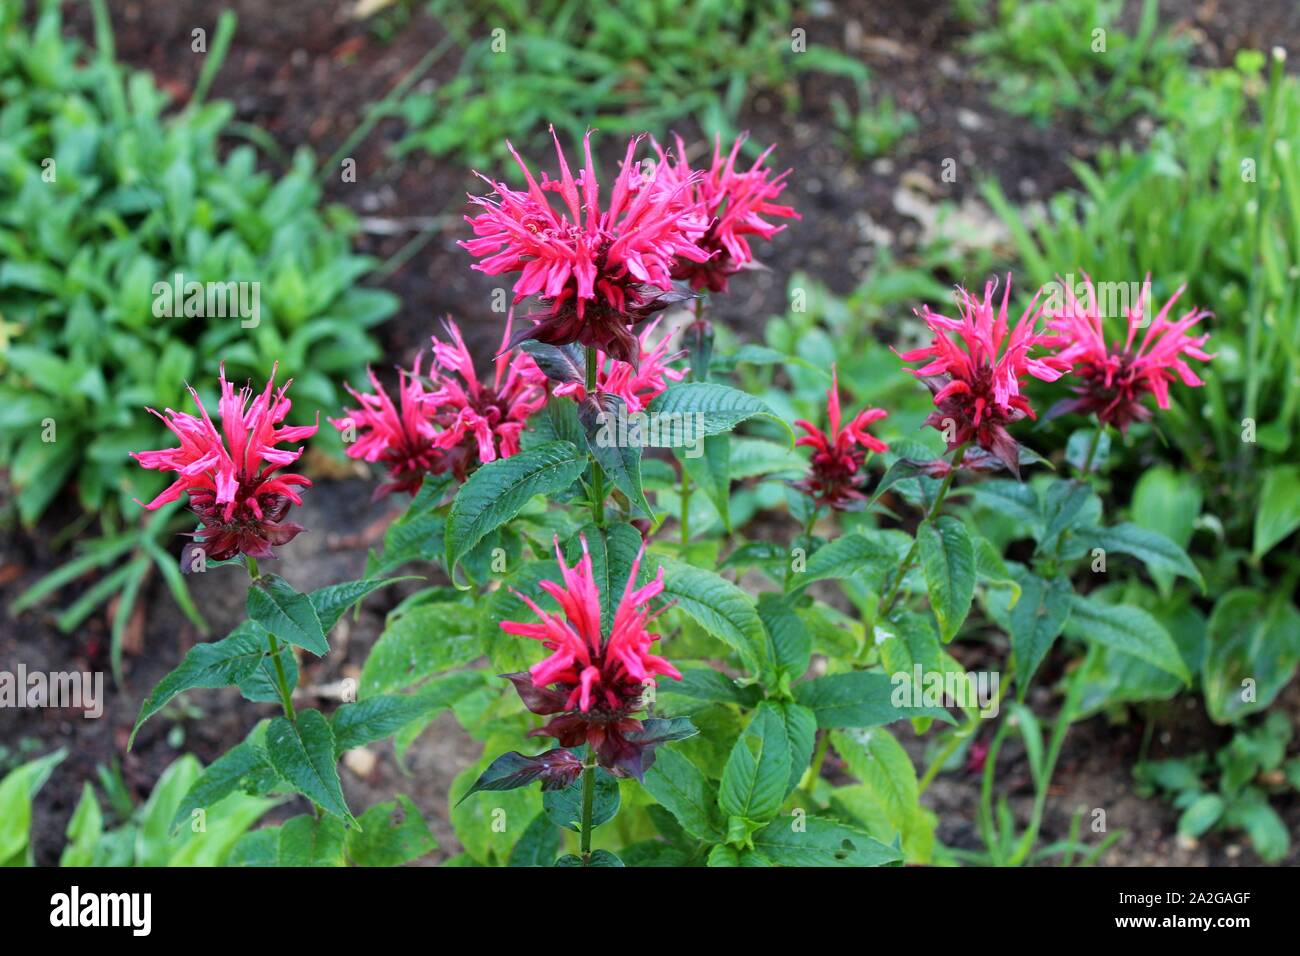 A Cluster Of Bee Balm Flowers Bloom In The Garden Stock Photo